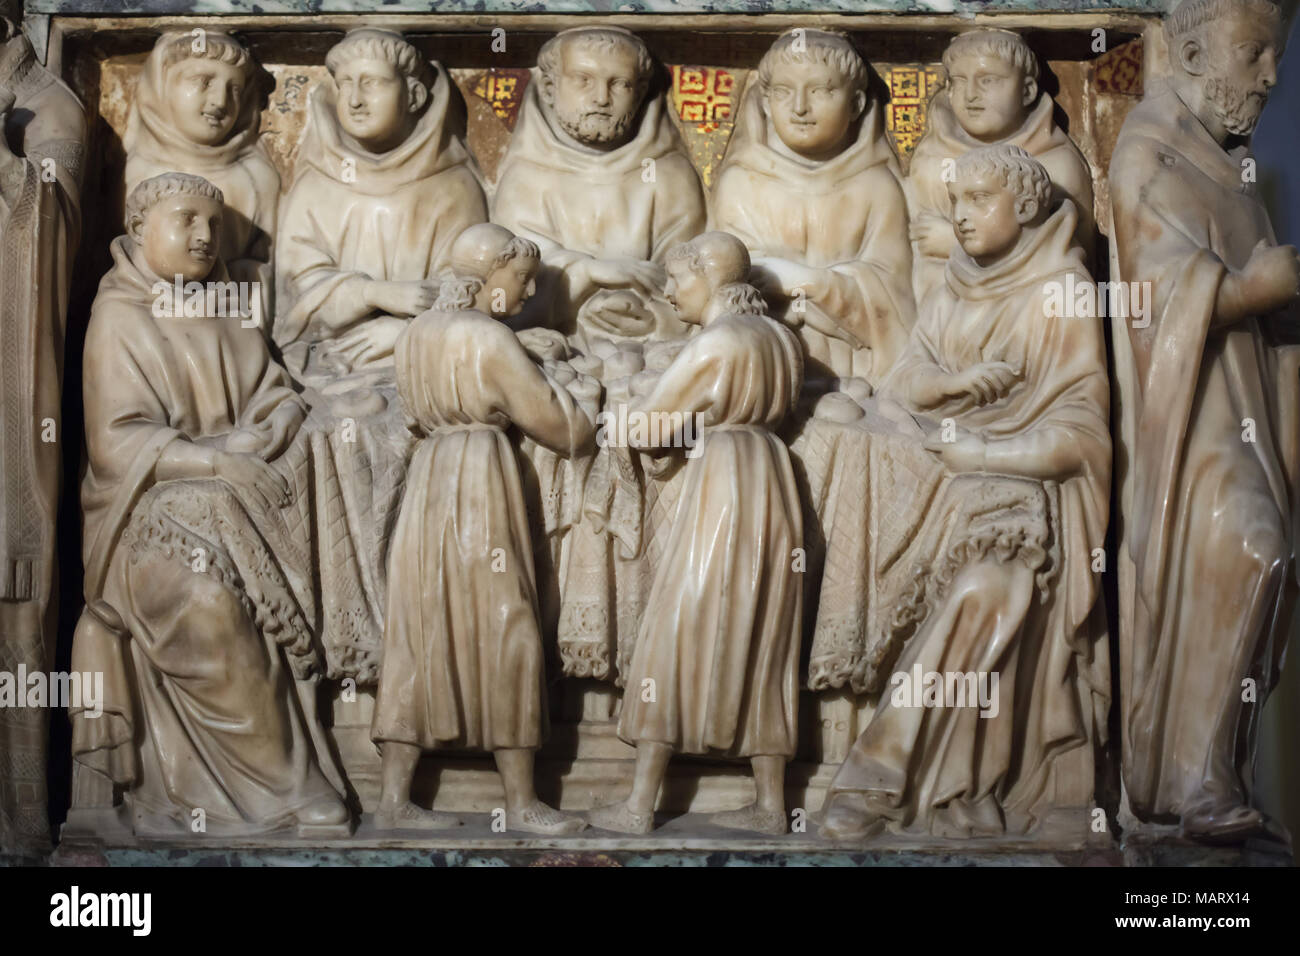 Miracles of Saint Dominic depicted in the marble relief carved by Italian Early Renaissance sculptor Nicola Pisano and his assistants Lapo di Ricevuto and Arnolfo di Cambio (1267) on the Arca di San Domenico (Shrine of Saint Dominic) in the Basilica of San Domenico (Basilica di San Domenico) in Bologna, Emilia-Romagna, Italy. The angels bring bread to the Friars thanks to Saint Dominic's Intercession, representing one of the first miracles of the saint. Stock Photo